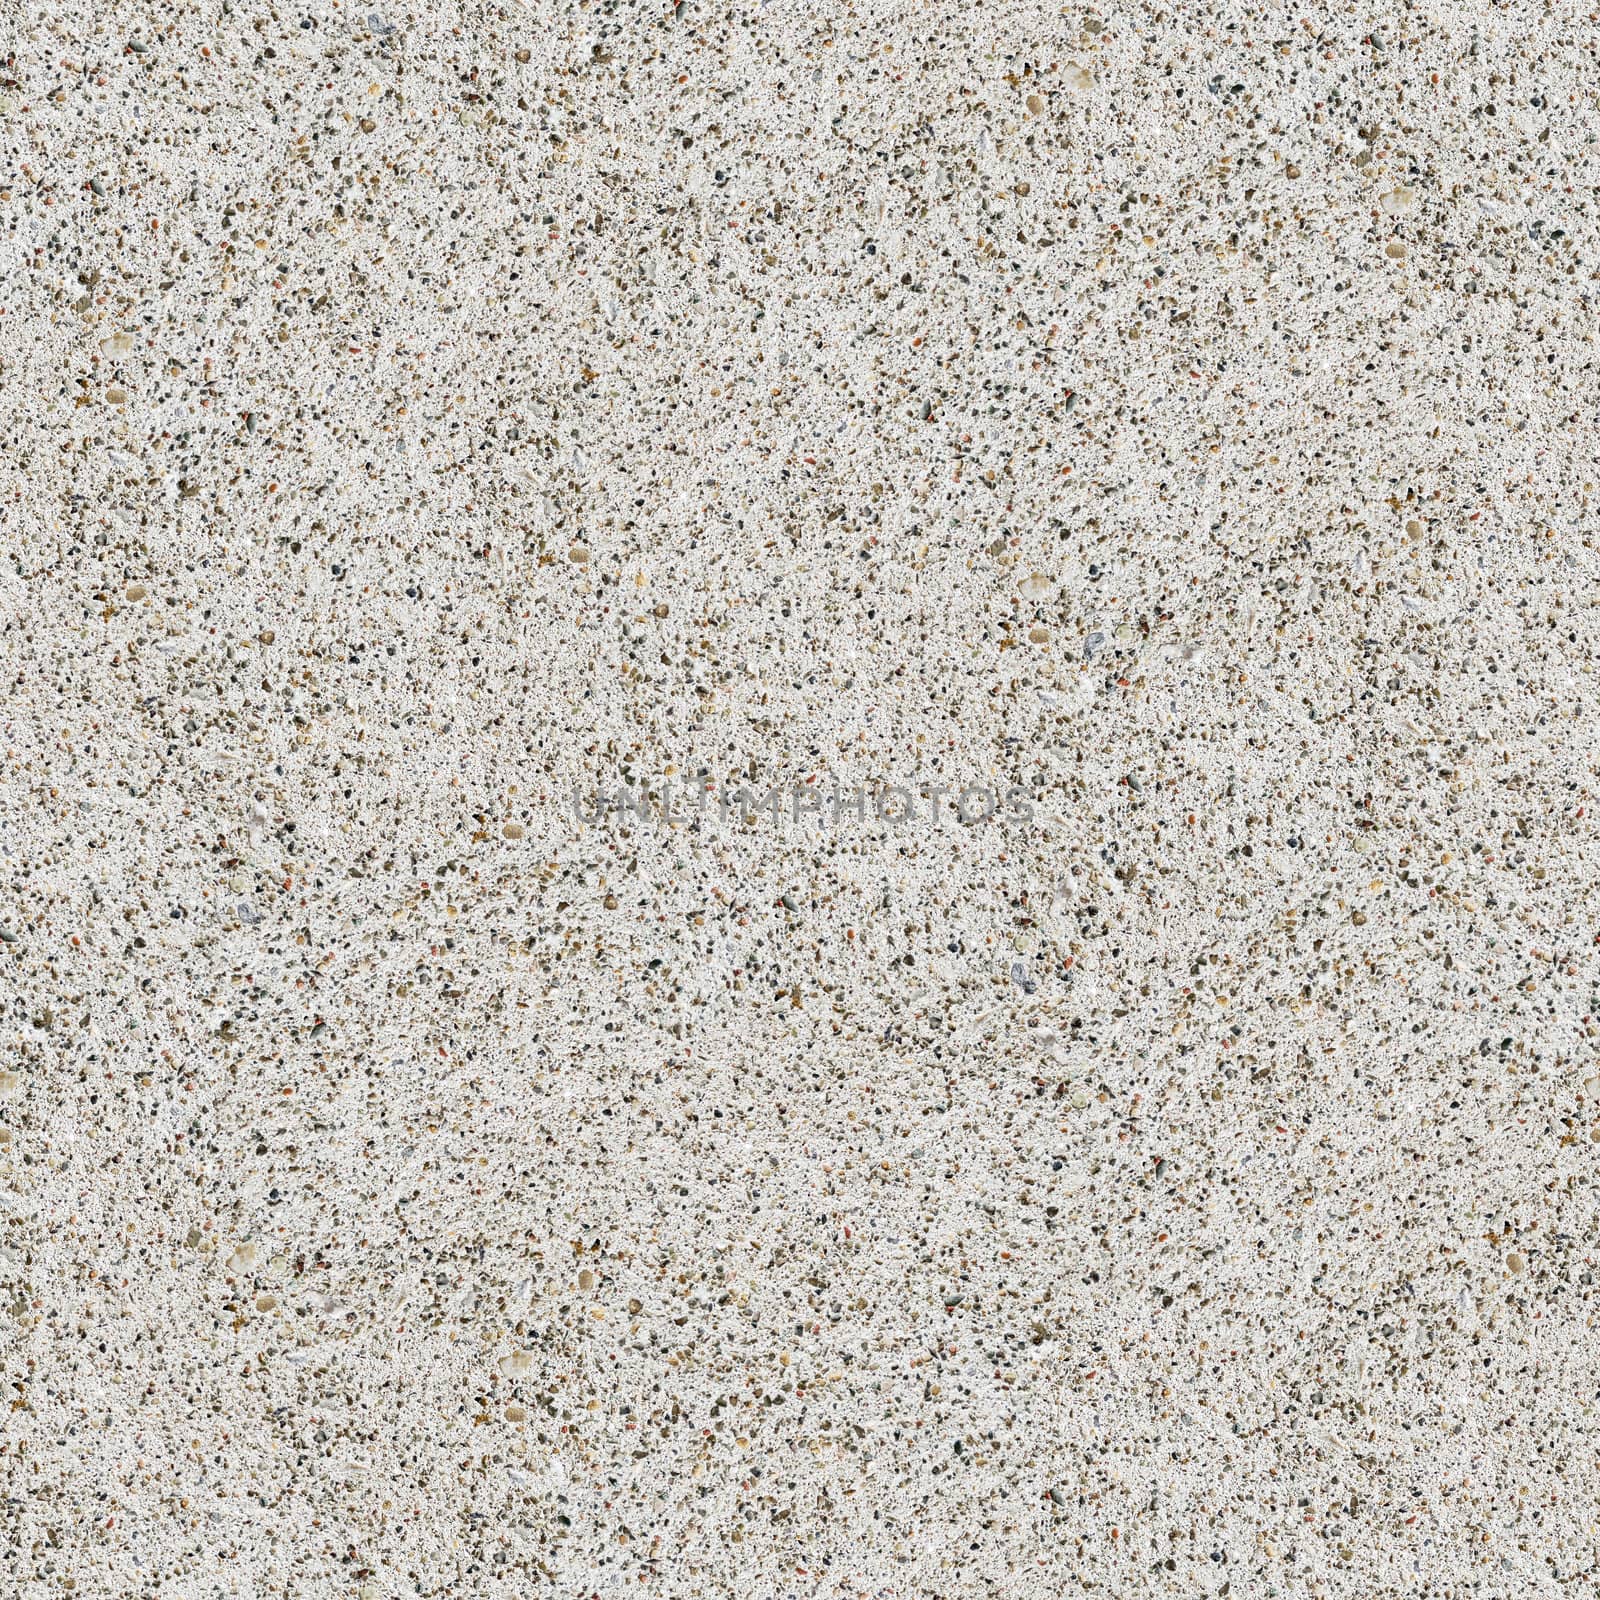 Light Gray Cement Gravel Seamless Composable Pattern - this image can be composed like tiles endlessly without visible lines between parts